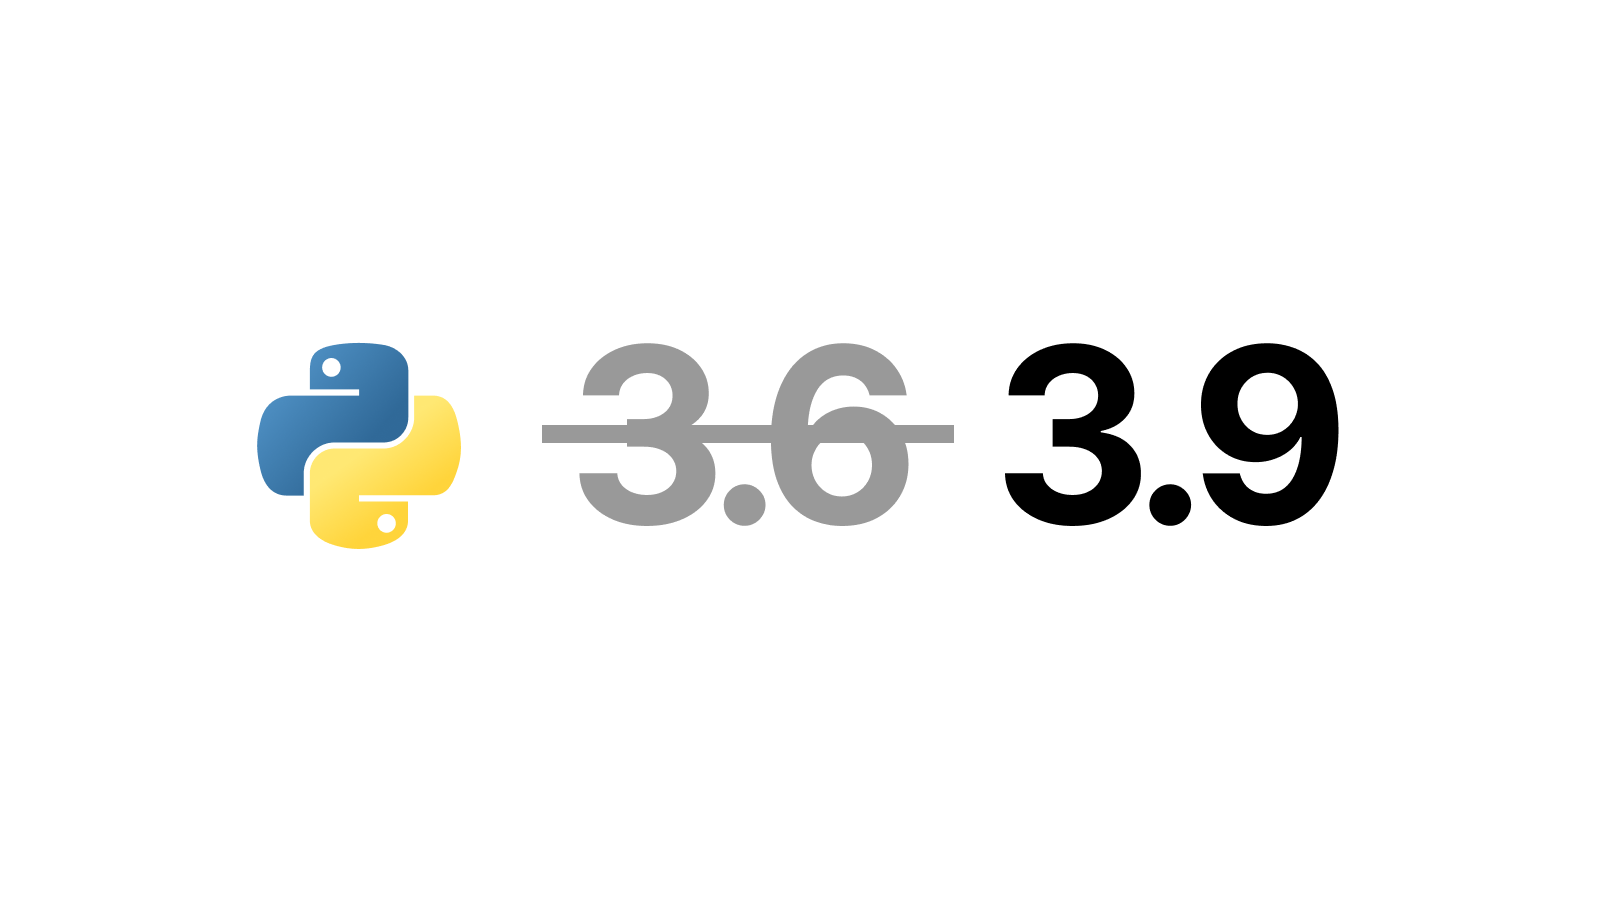 Cover for Python 3.6 is being deprecated